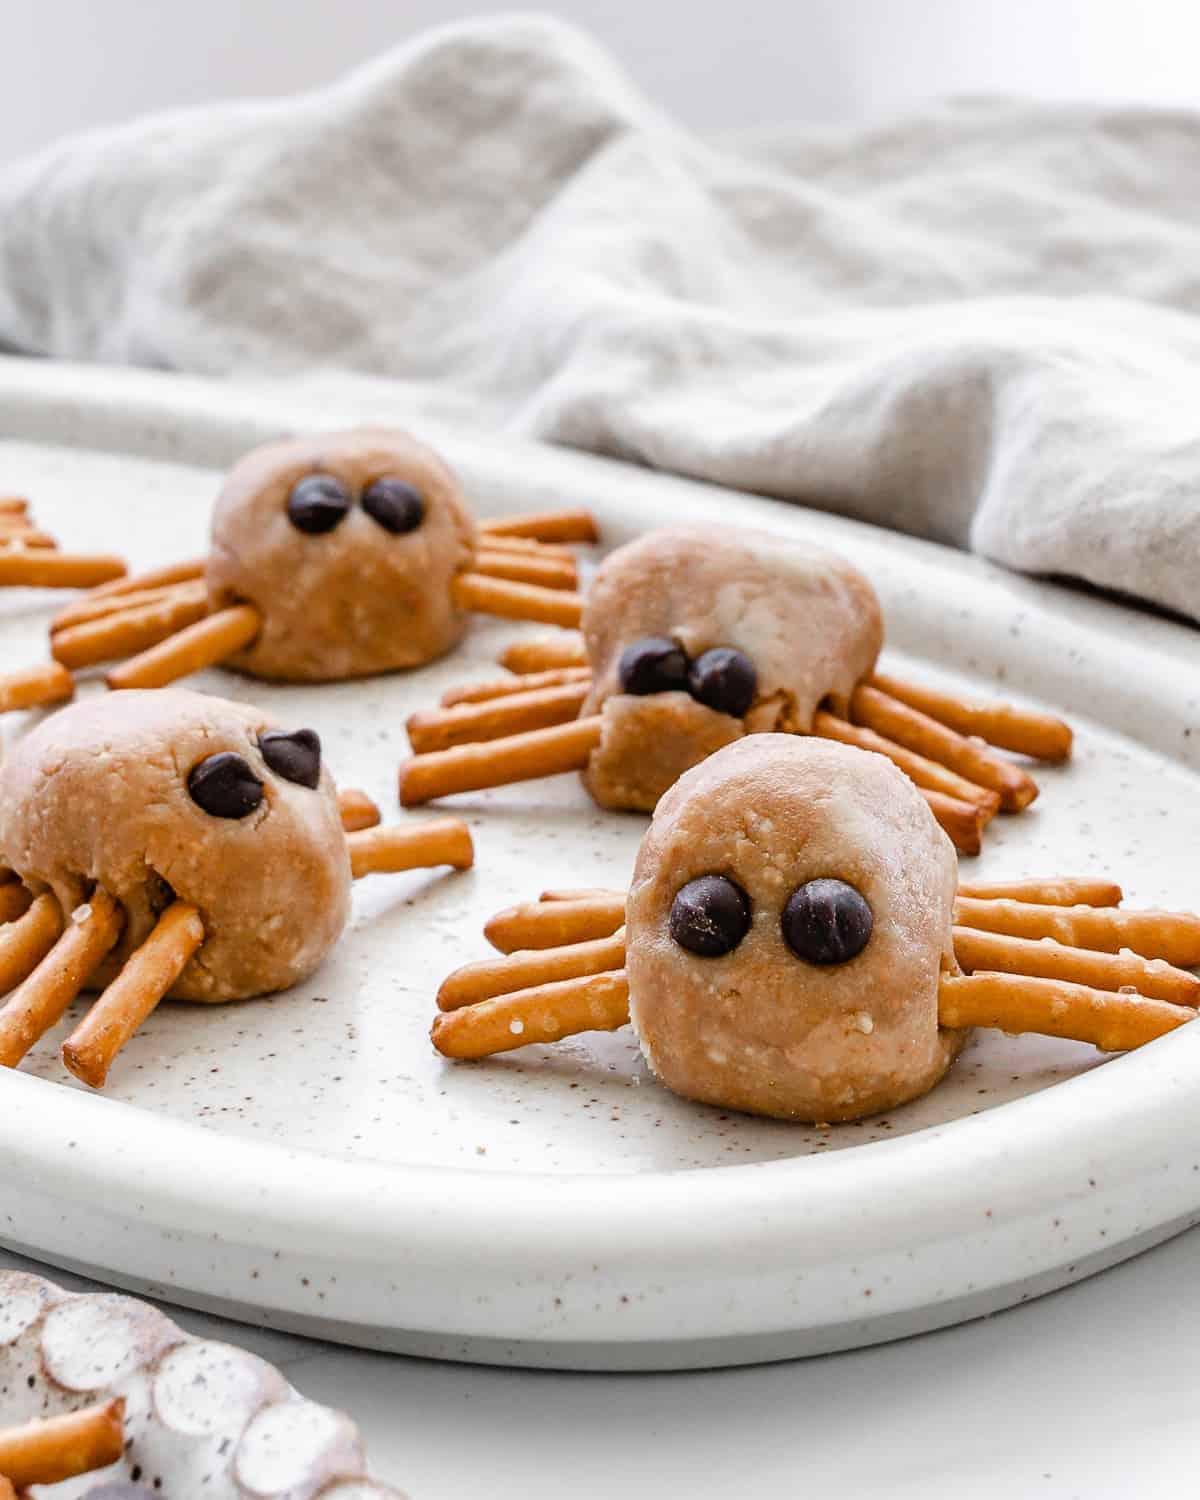 Peanut butter no bake protein balls, decorated as spiders, displayed on a white plate for Halloween.